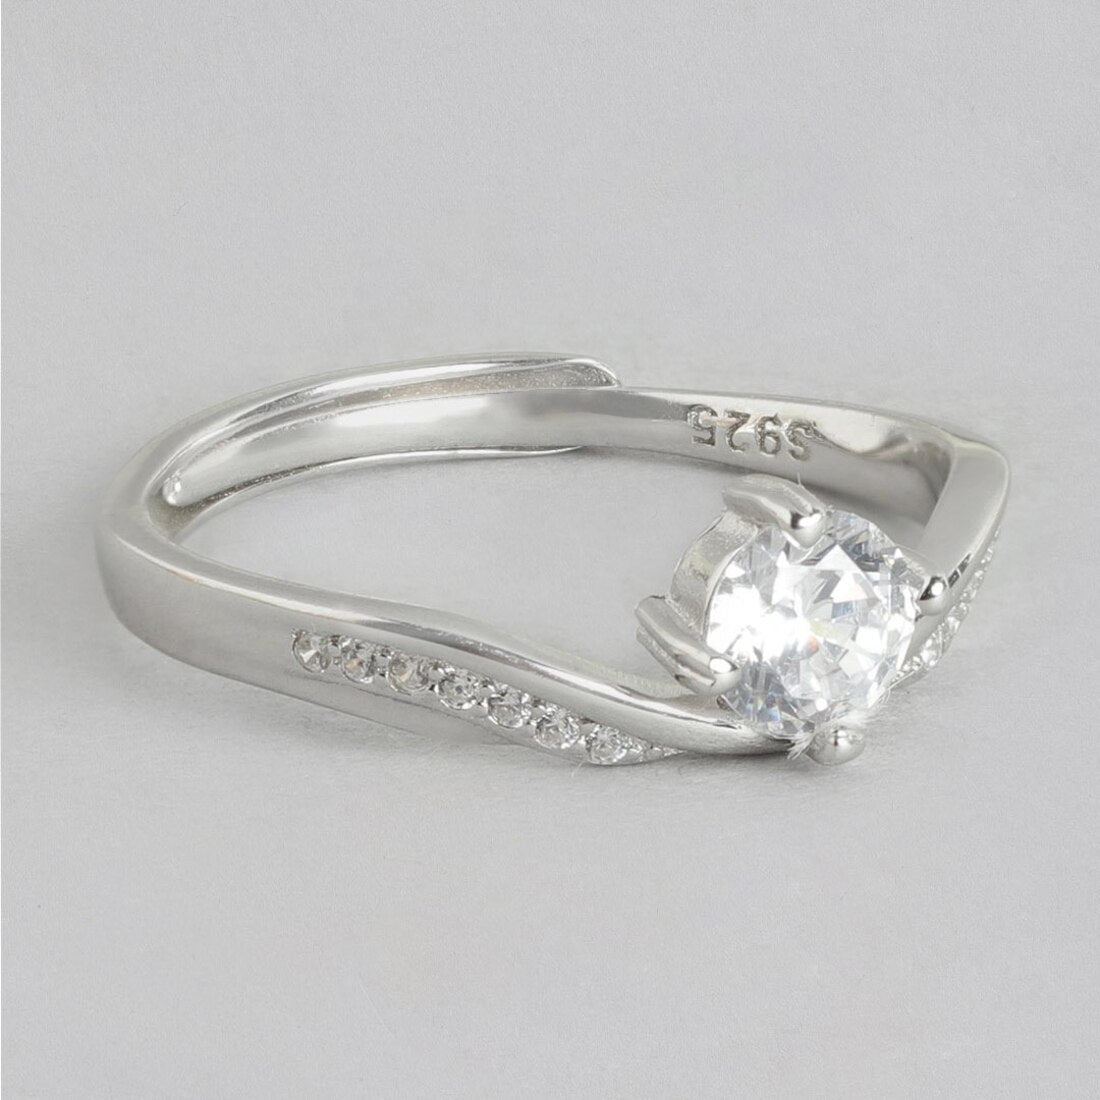 Sparkling Elegance Rhodium-Plated 925 Sterling Silver Ring